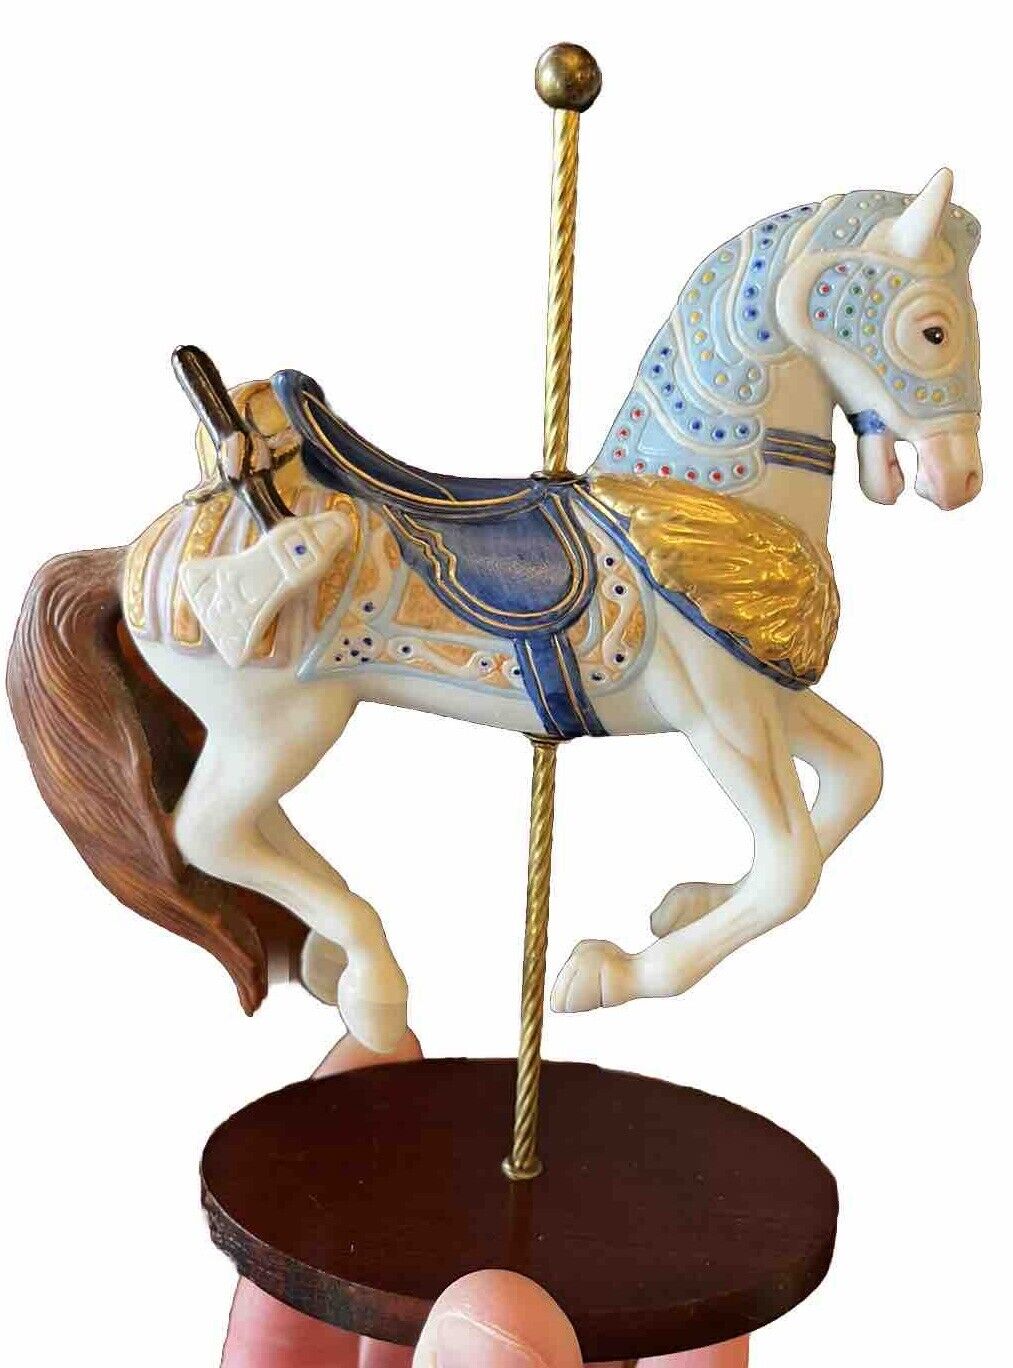 ‘88 Franklin Mint Treasury Of Carousel Art Armored Horse/Gold/Wings/Greece, A